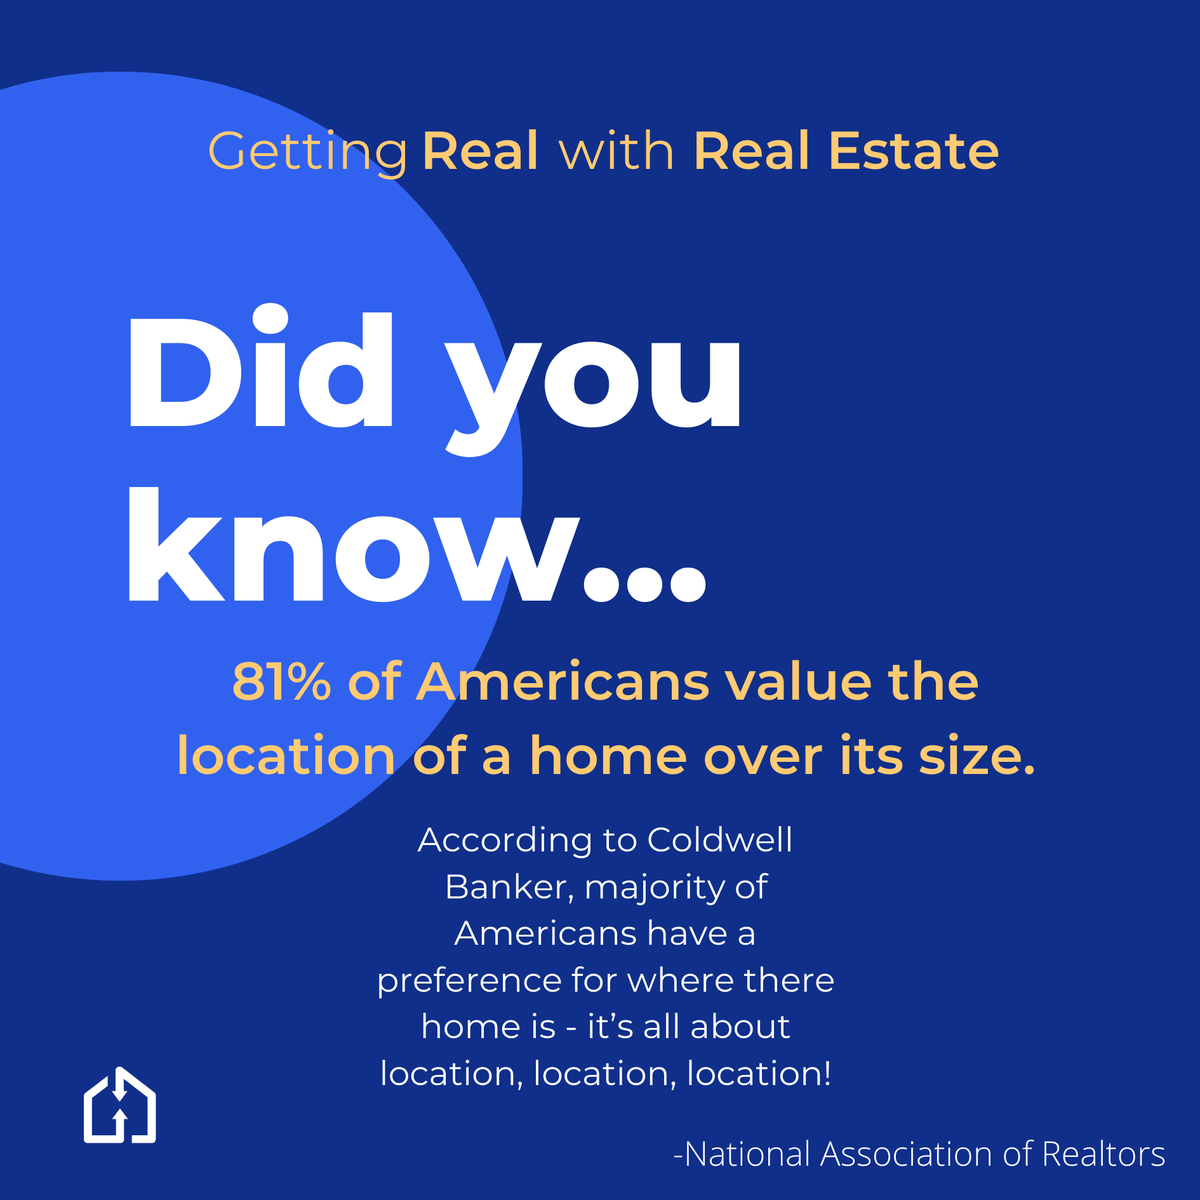 It's time to #GetRealWithRealEstate 🏘️📈

#DidYouKnow that 81% of Americans prefer location over size when it comes to homes?

Nowadays, it's all about location, location, location 📍

#RealEstateFacts #HomeListing #Internet